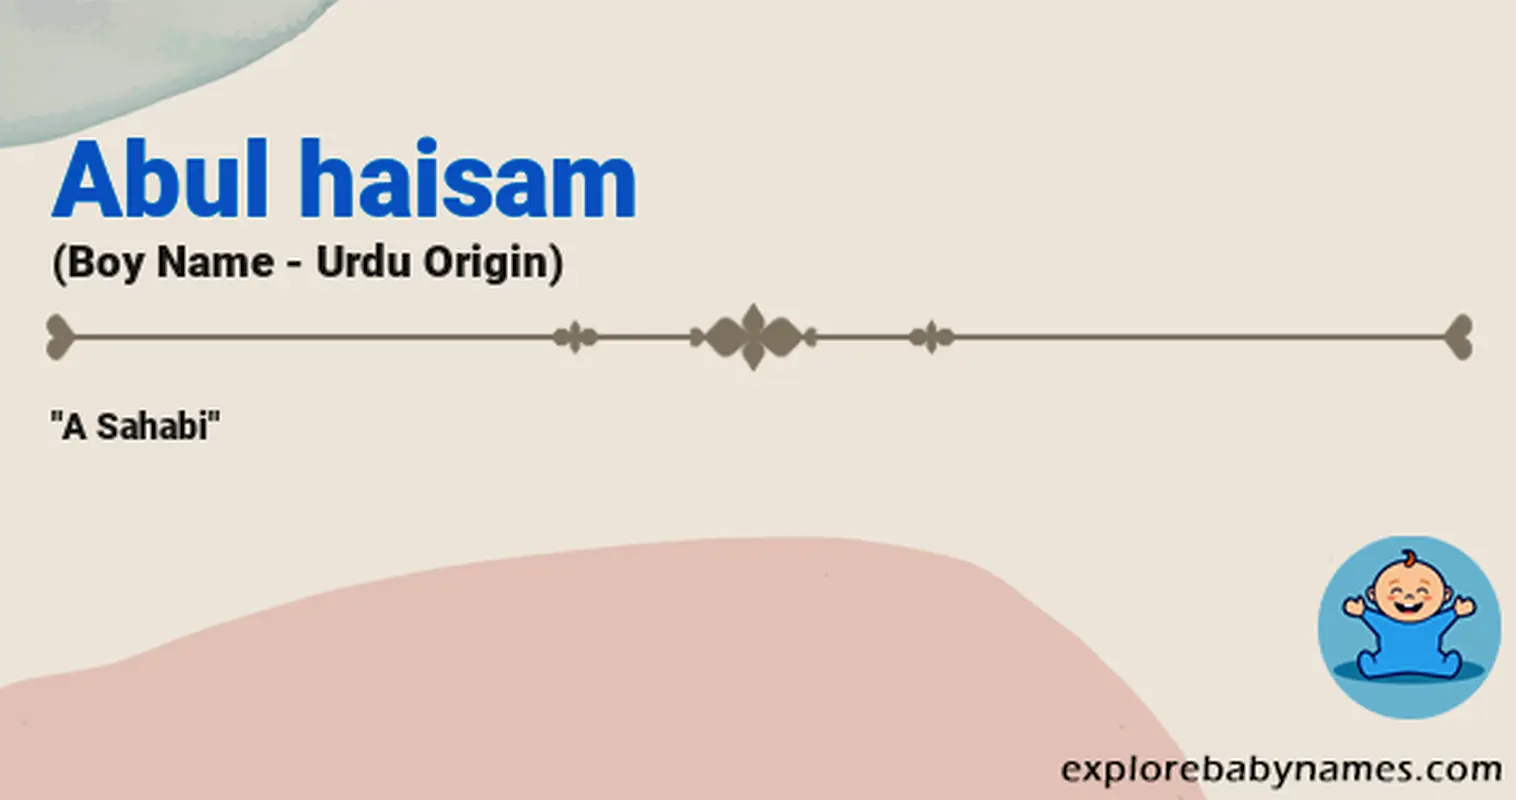 Meaning of Abul haisam